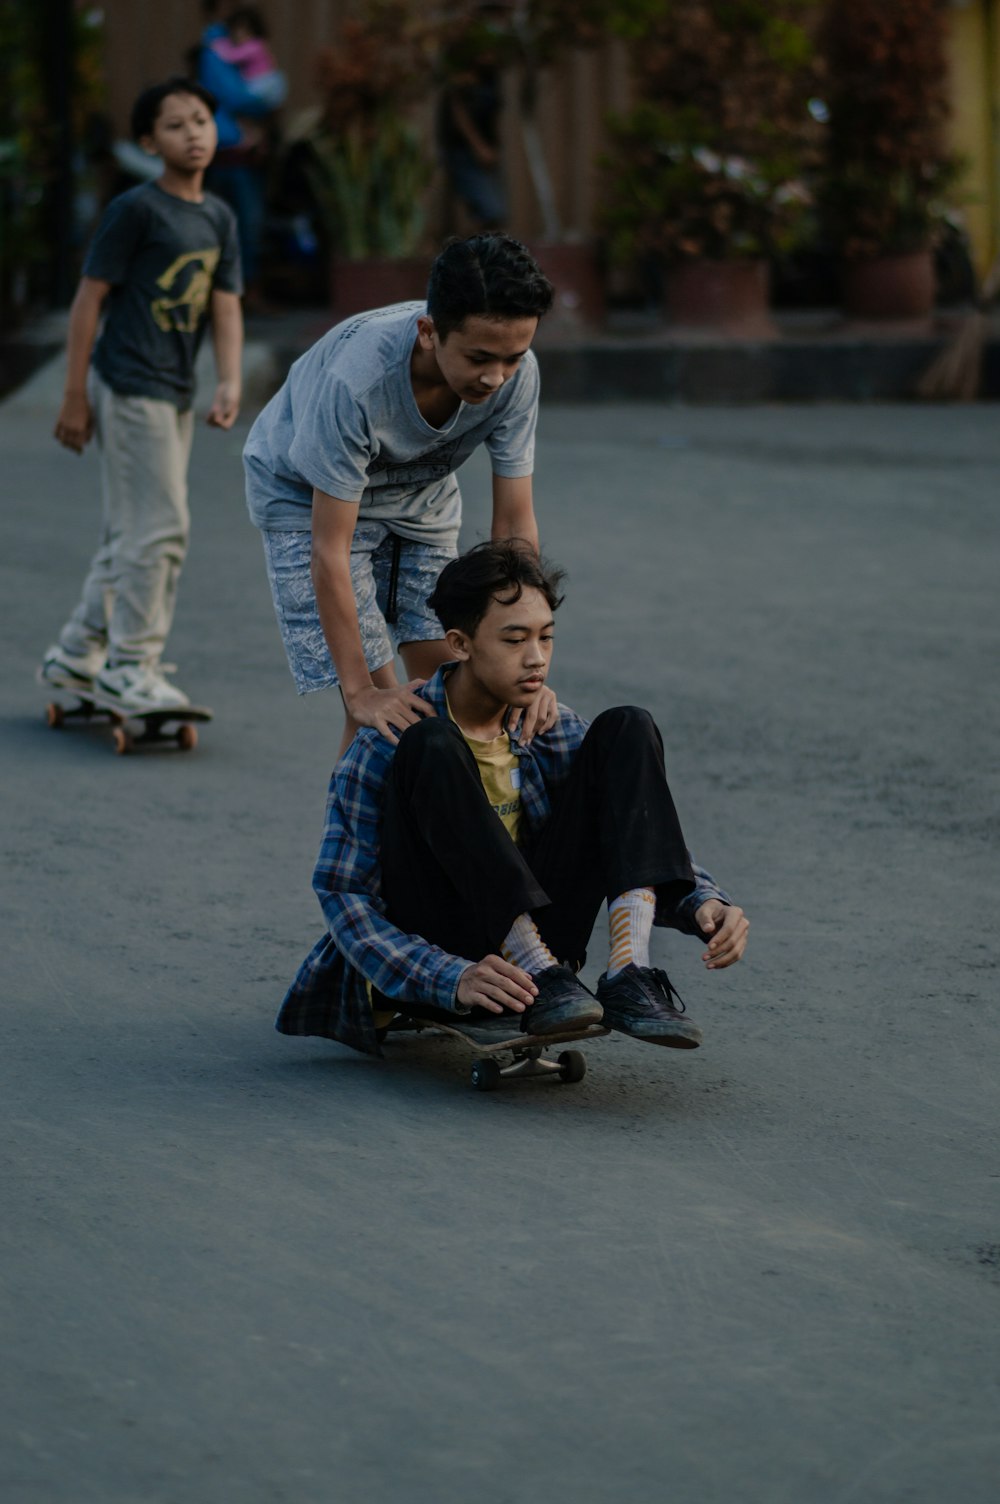 a group of young men riding skateboards down a street